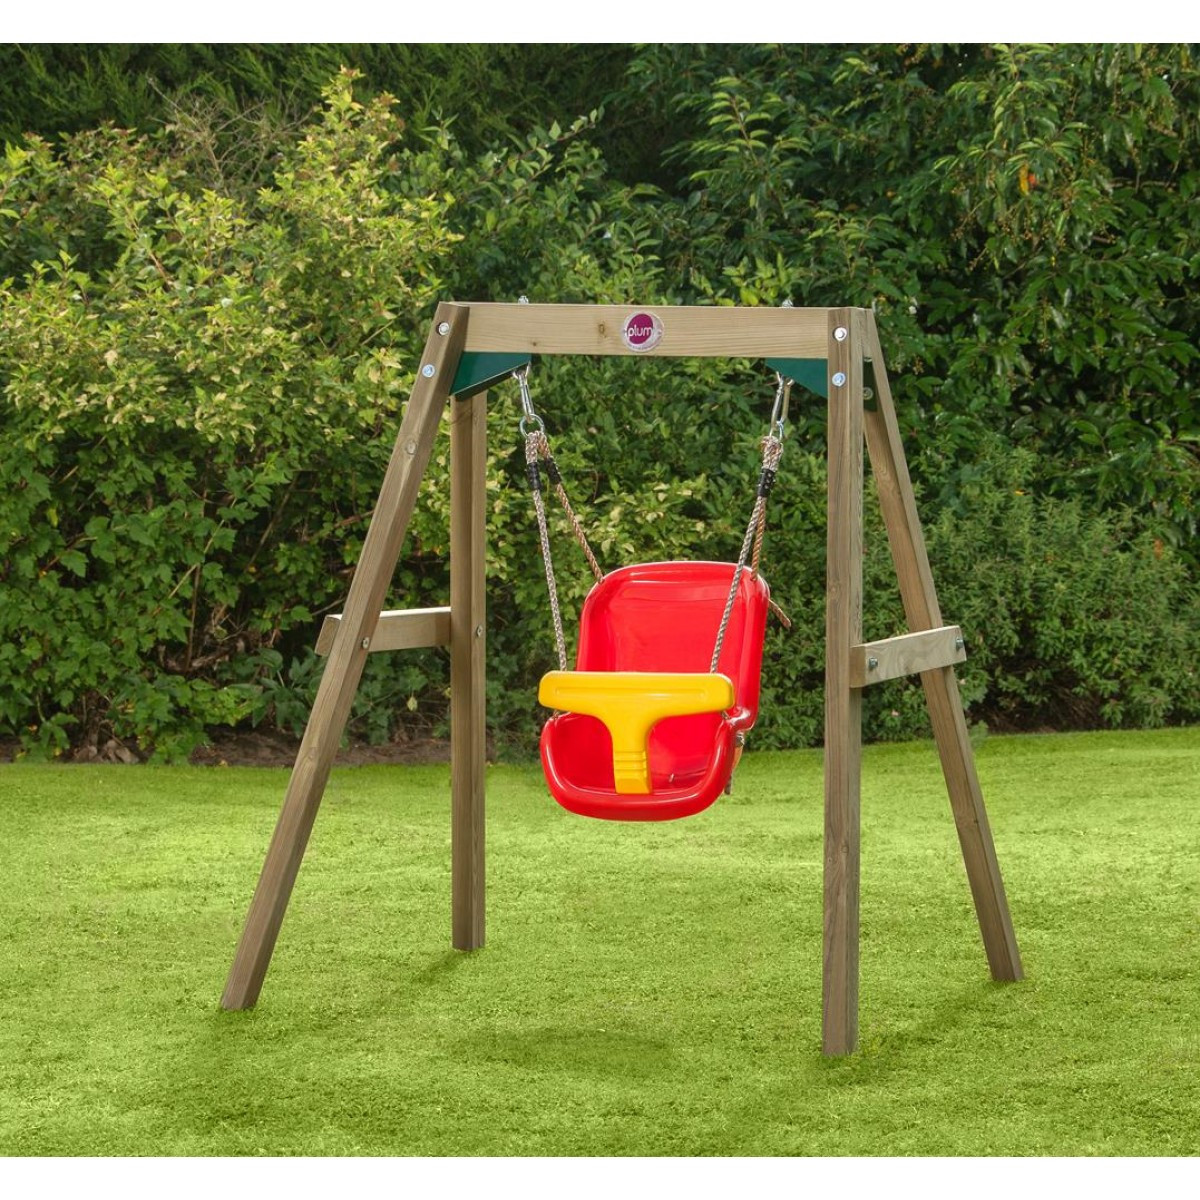 Best ideas about Baby Swing Set
. Save or Pin Plum Wooden Baby Swing Set Now.